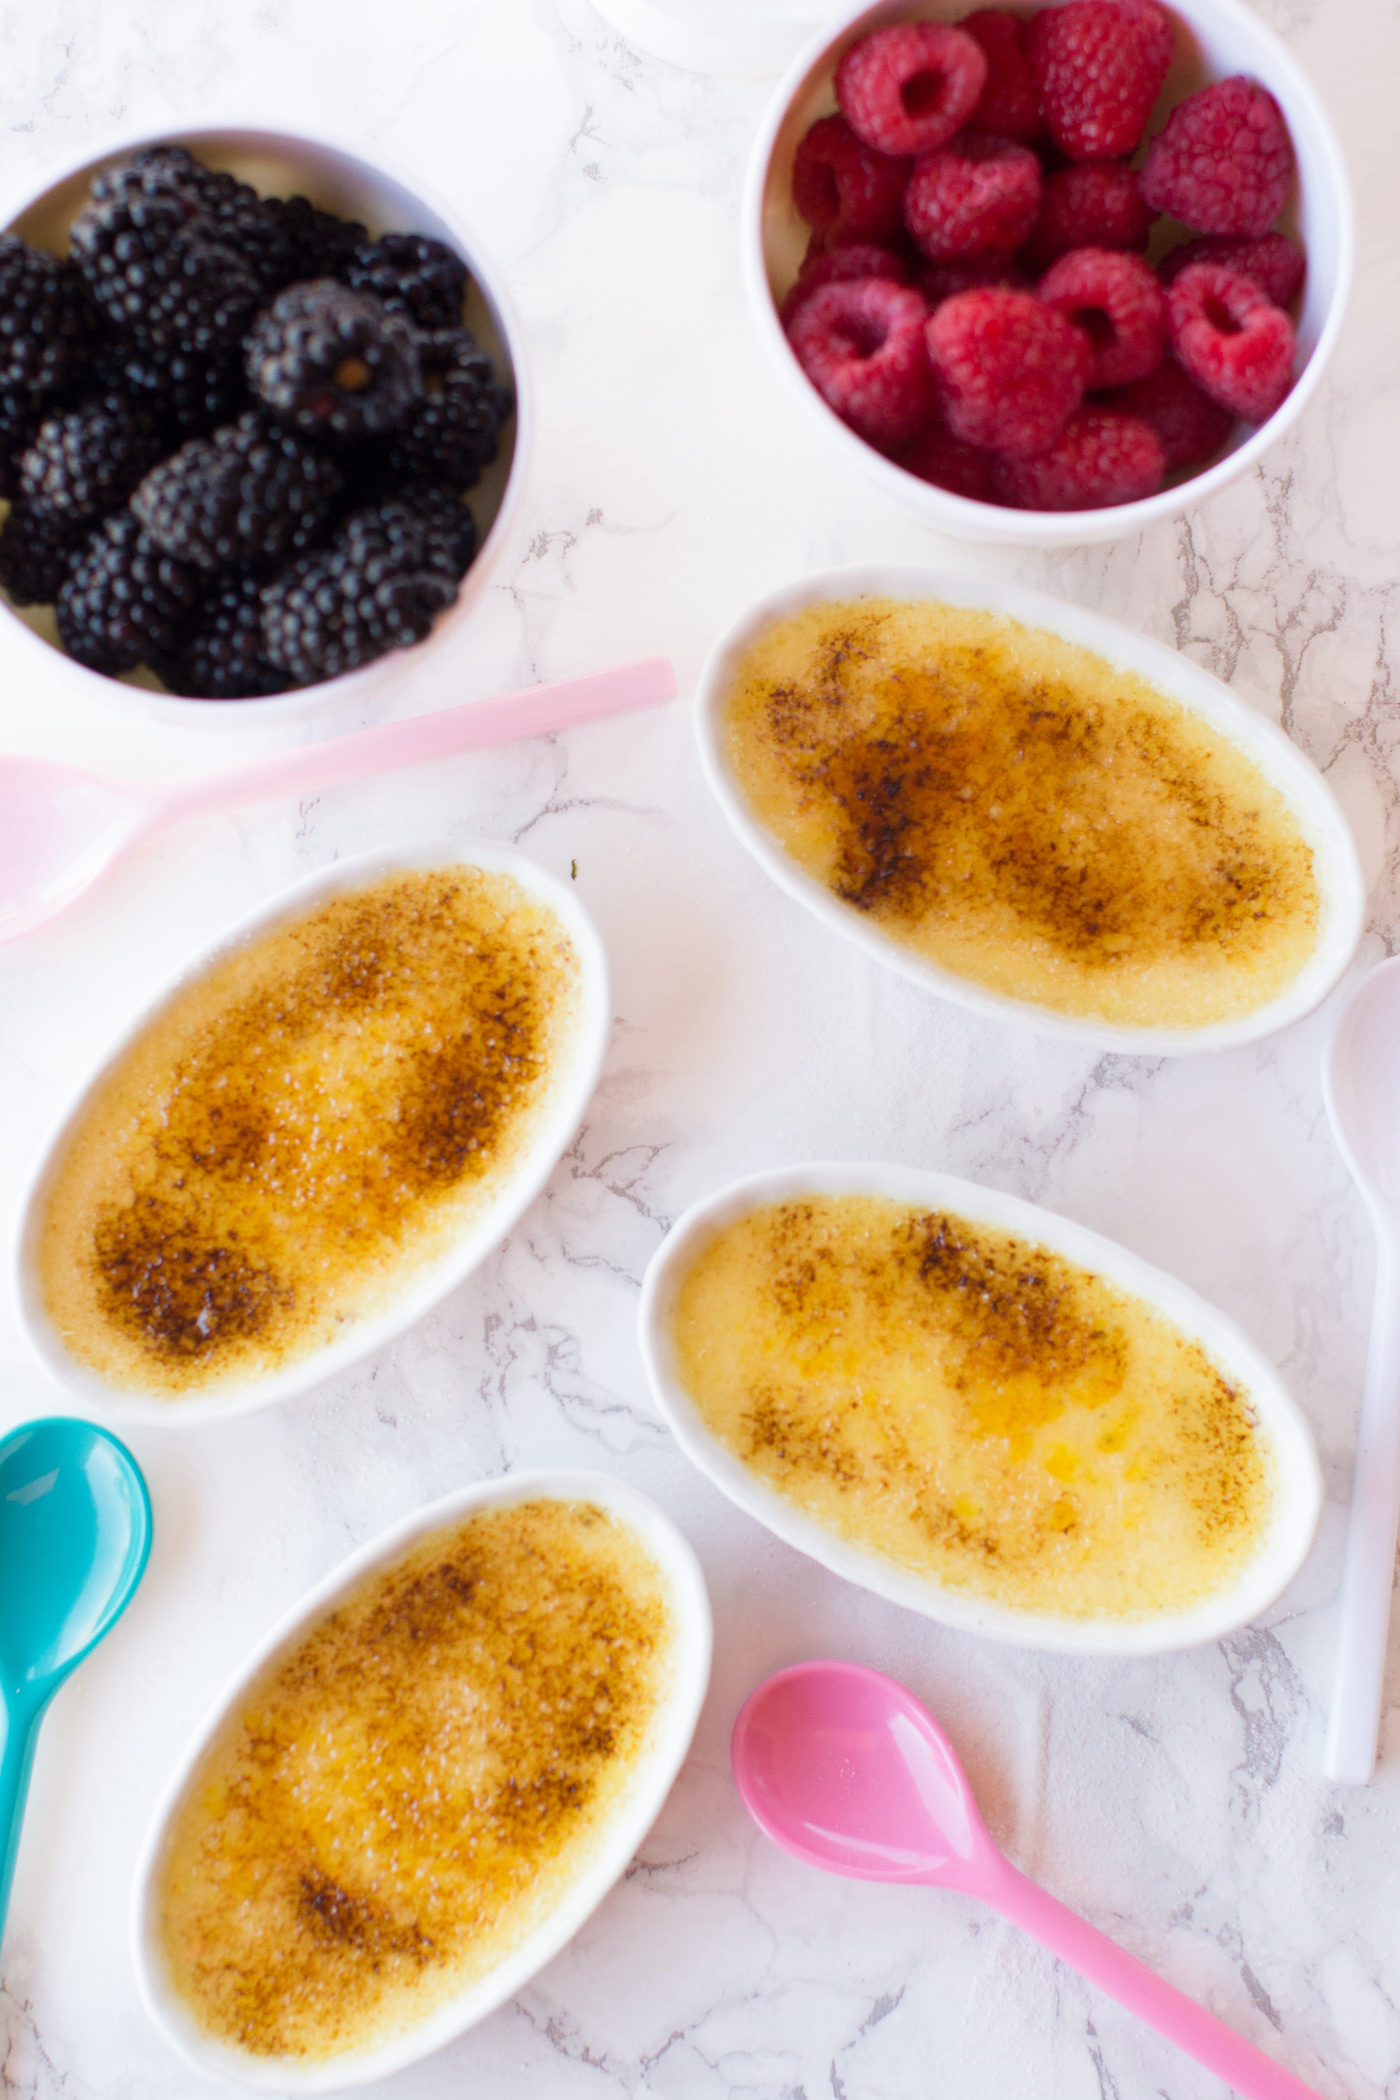 Berries and finished creme brulee